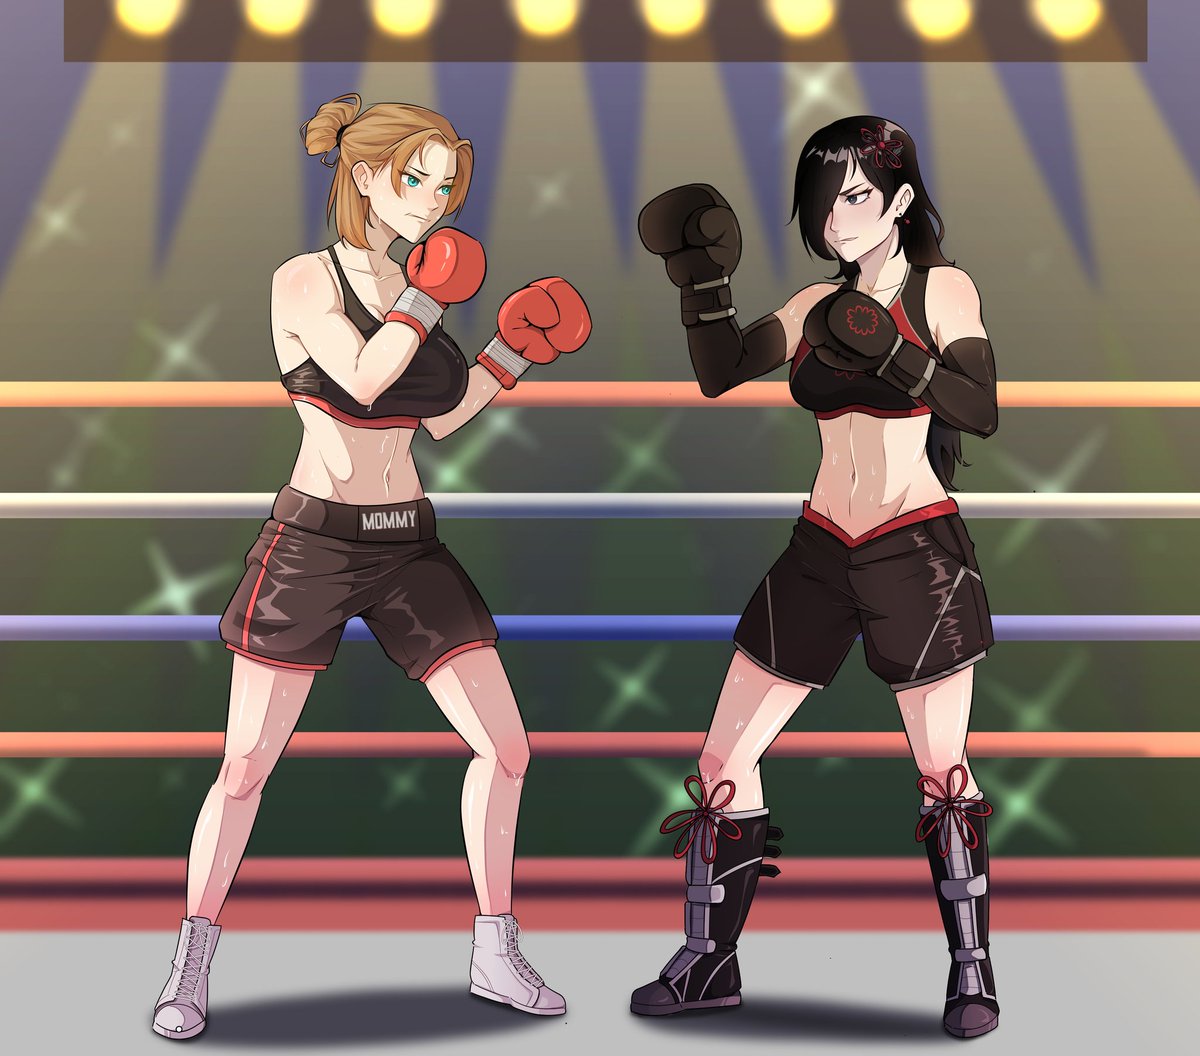 @mommysekar vs Leila The fight will begin Artist: @WahyuAd91515662